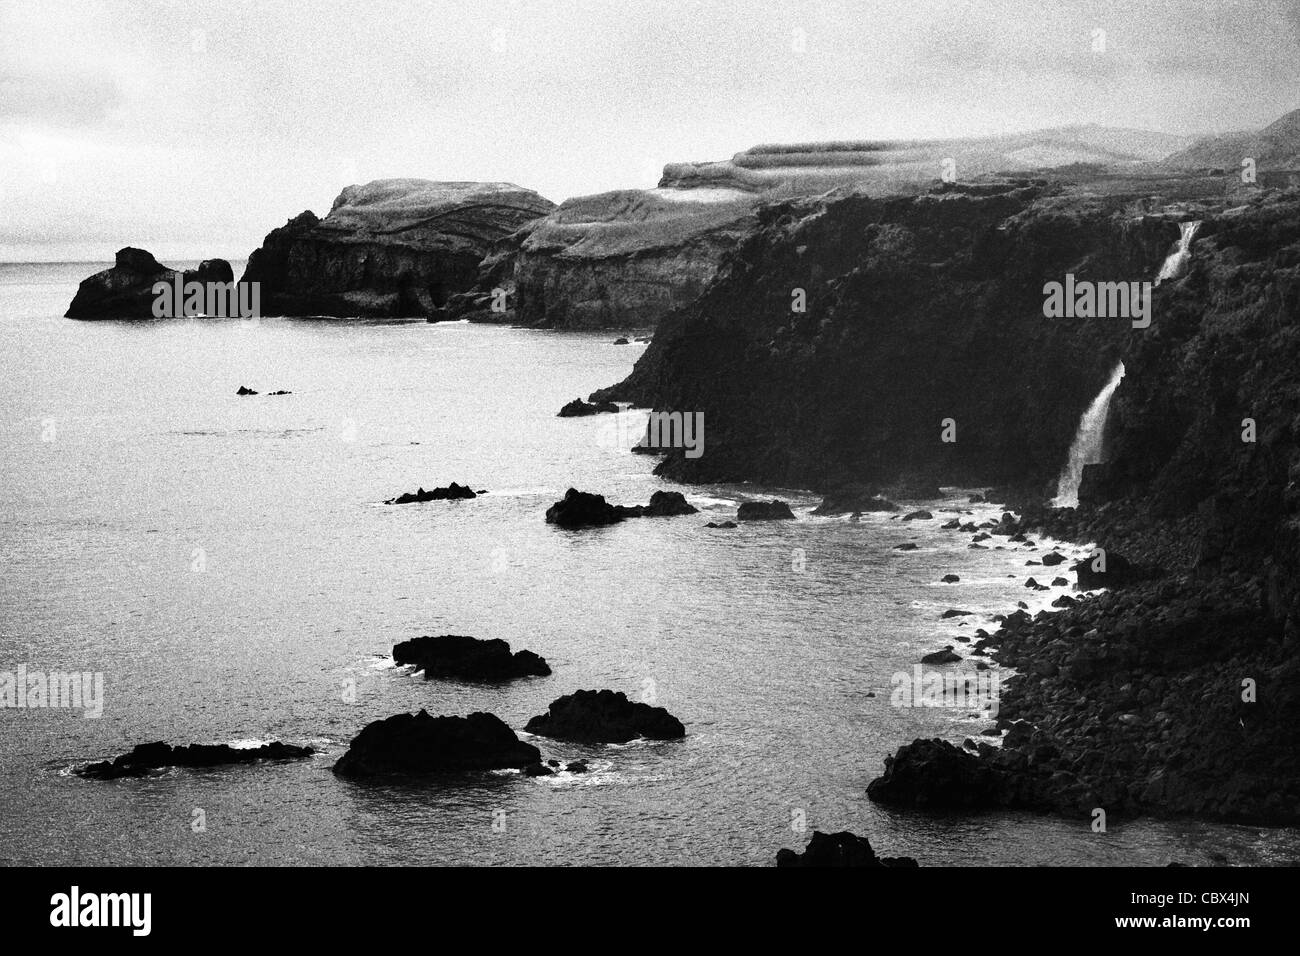 Black and white coastal landscape from Sao Miguel island, Azores, Portugal. Stock Photo